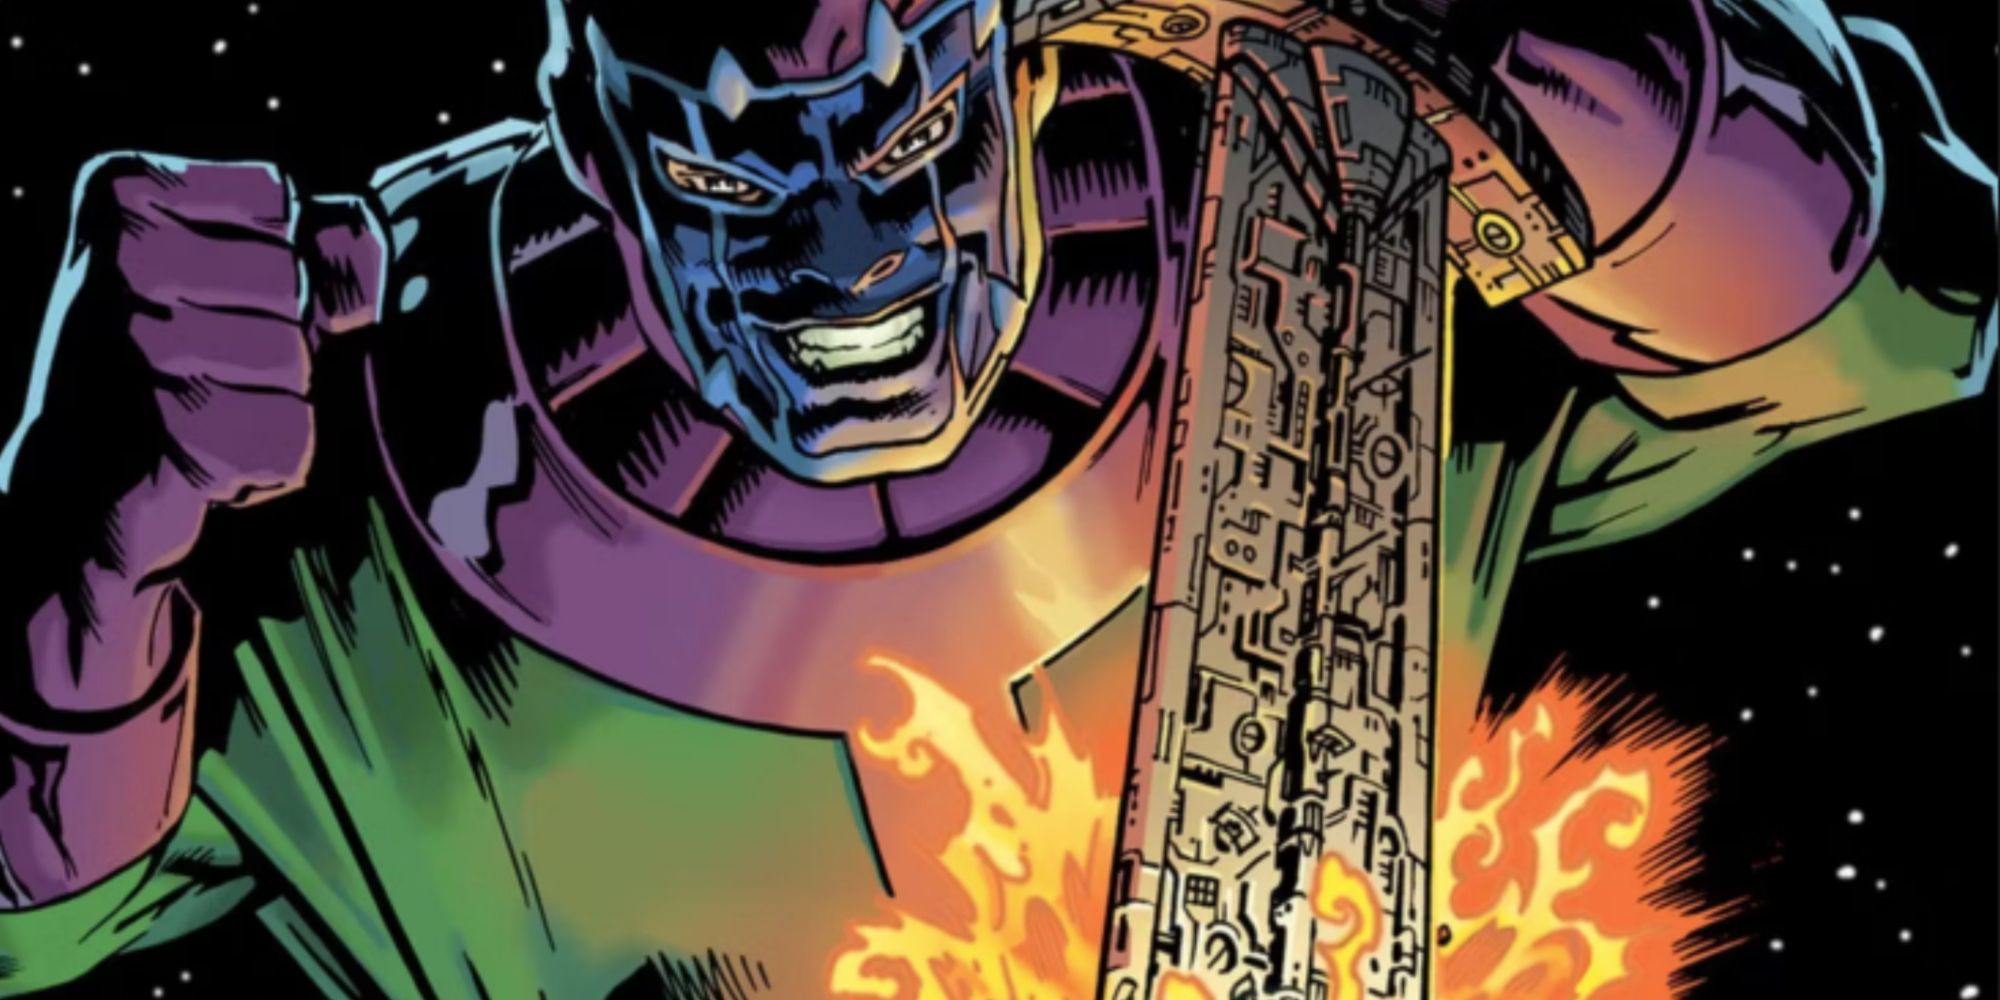 Kang The Conqueror plunges his sword into the world in Marvel Comics.